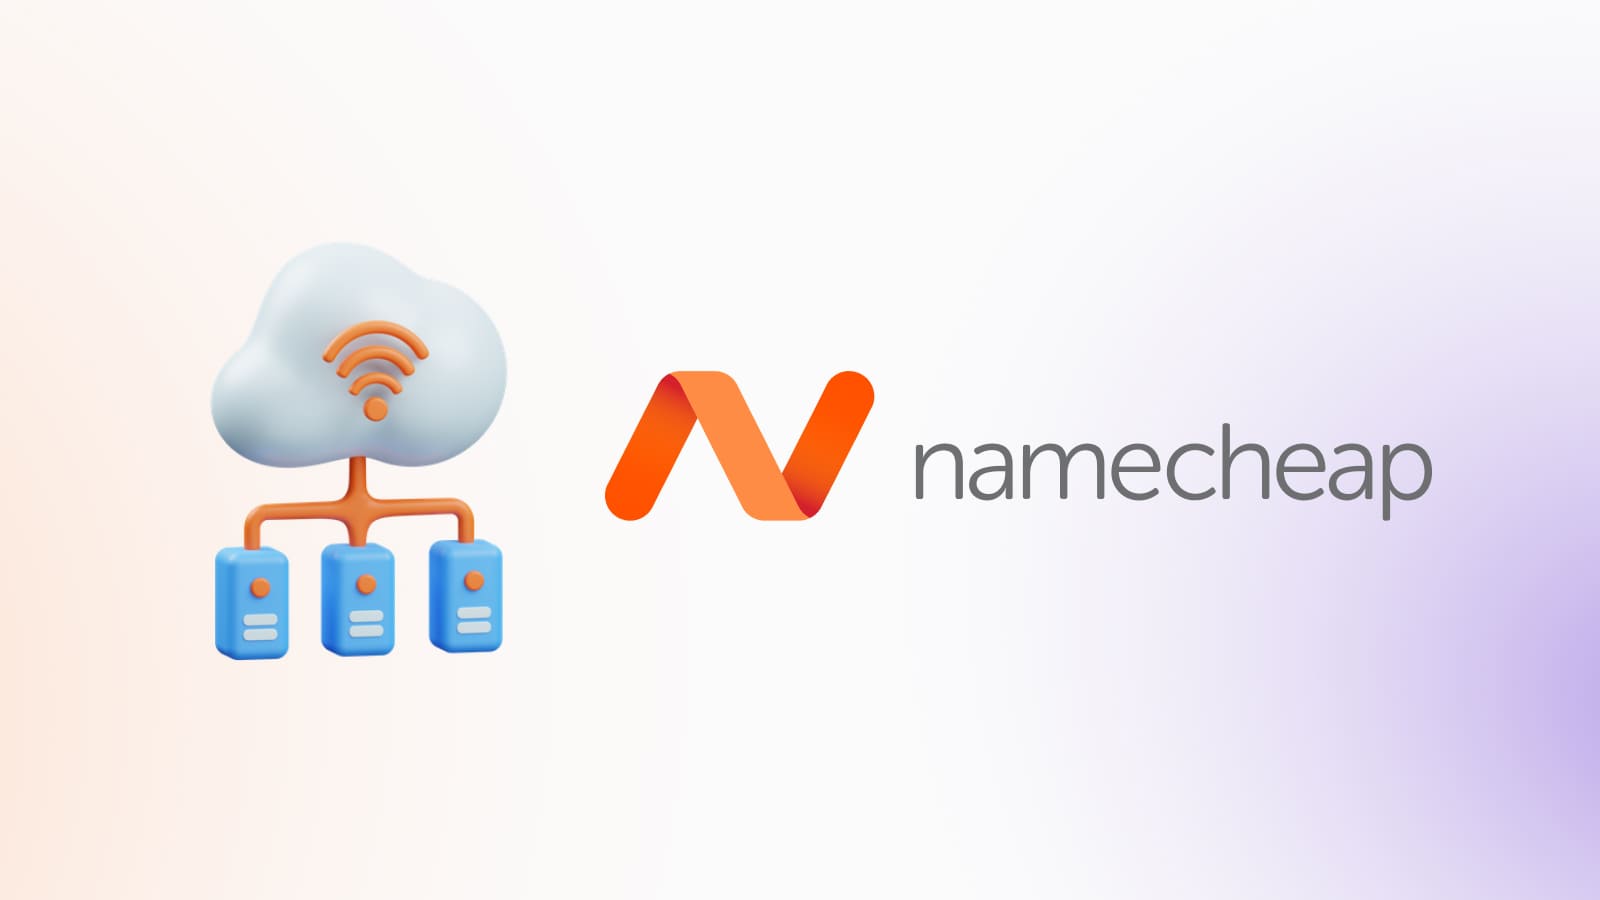 Namecheap, a leading domain registrar, supports Bitcoin payments via BTCPay and BitPay.